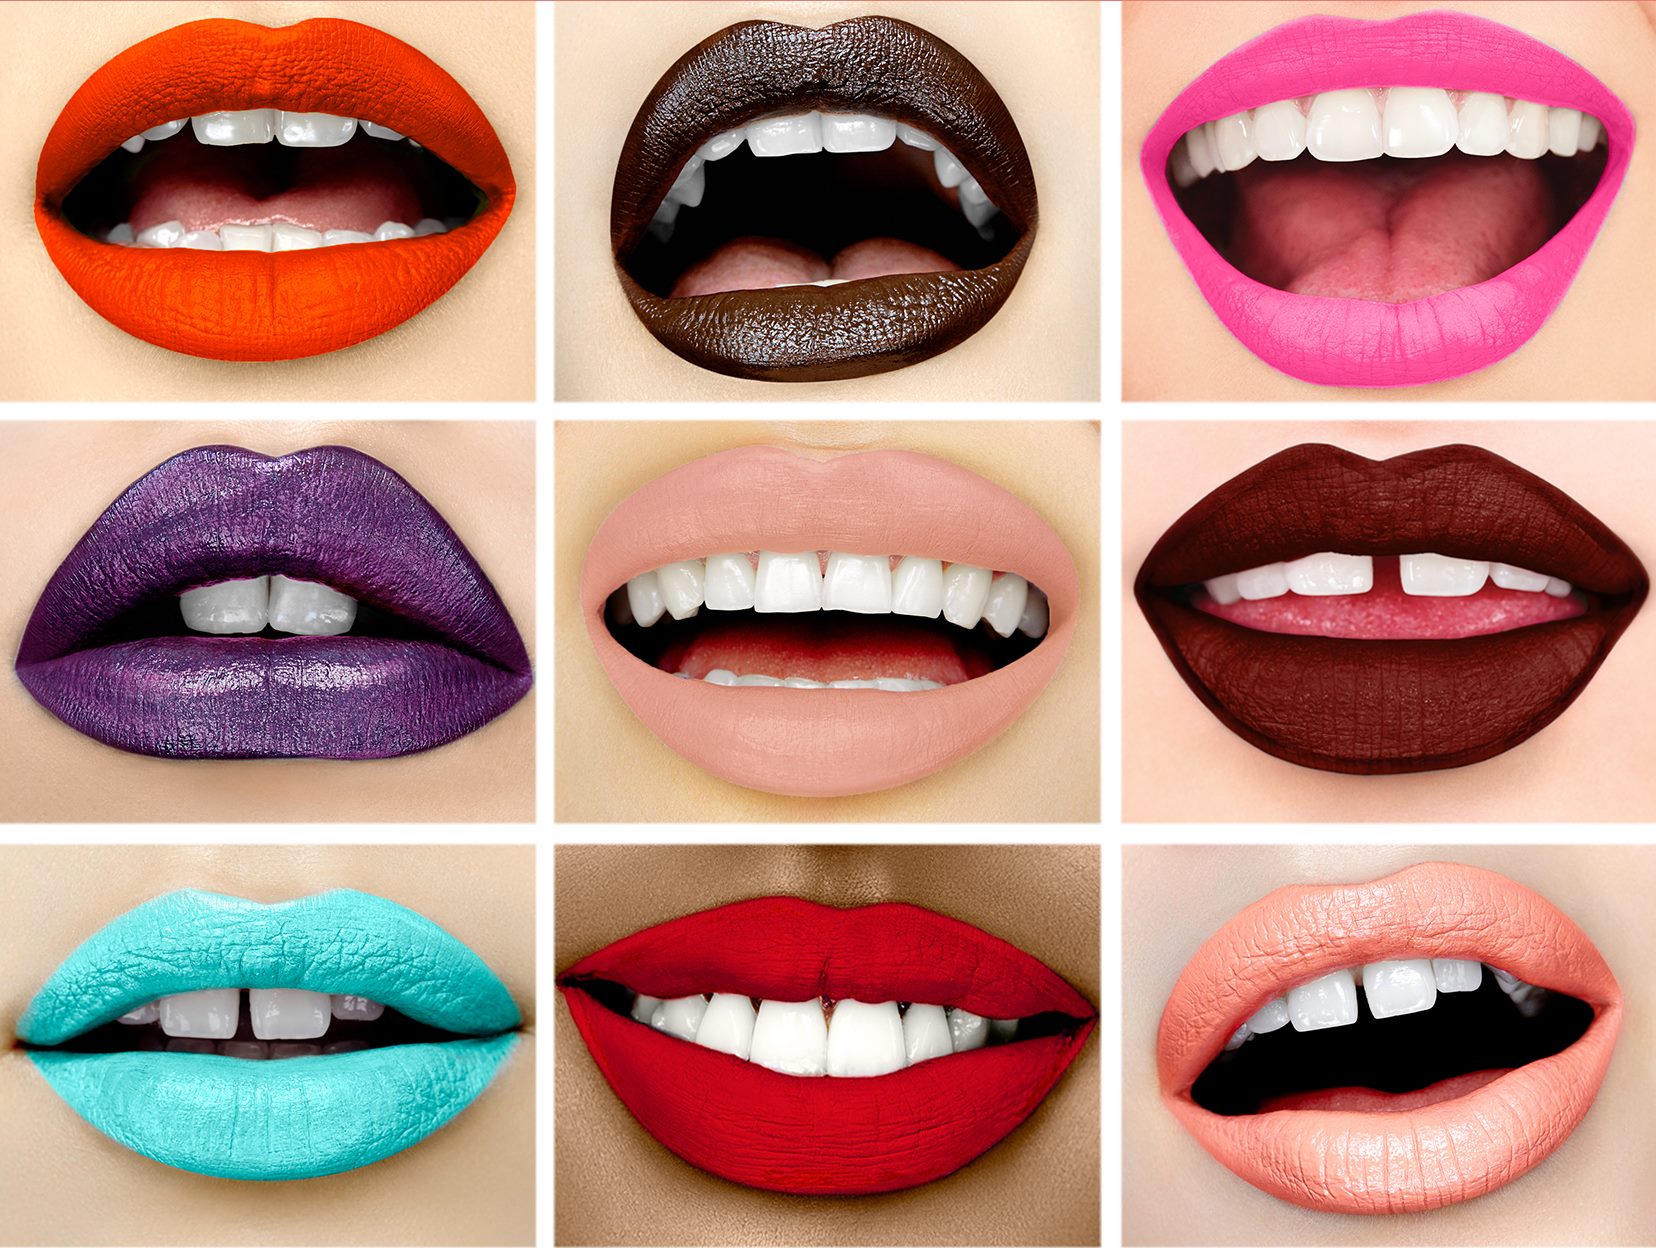 Celebrate National Lipstick Day with FREE lipstick from MAC Cosmetics today!